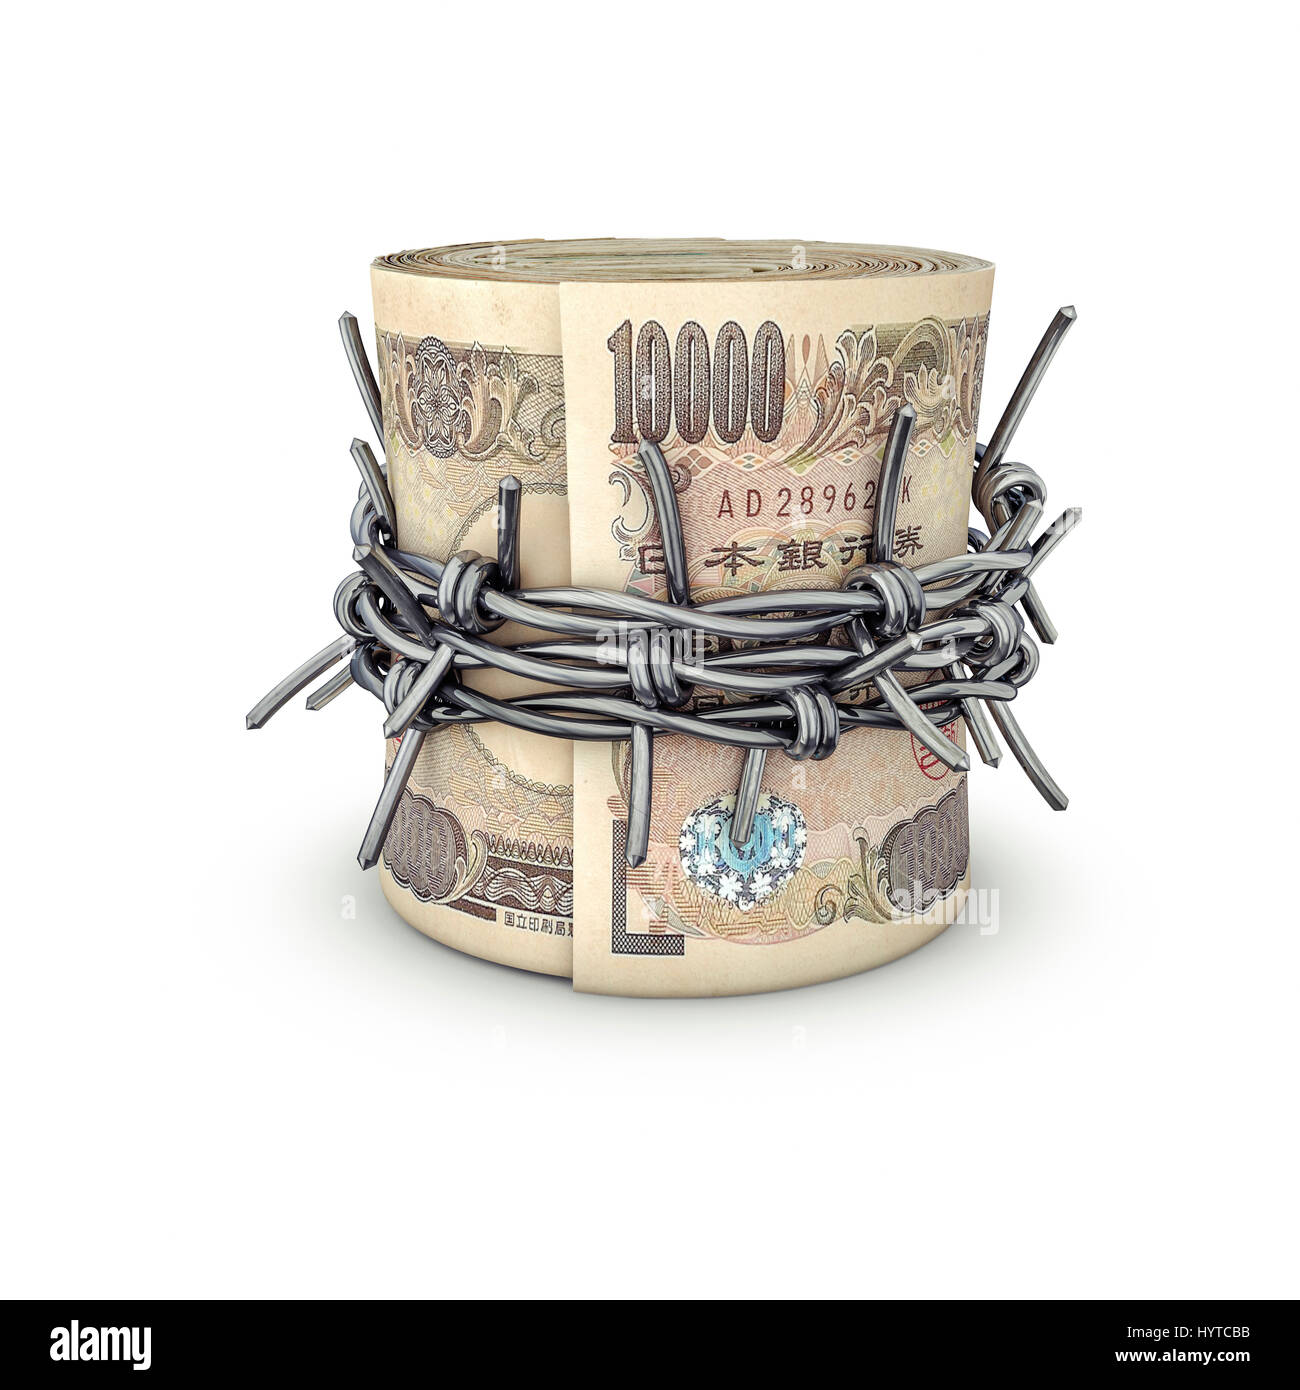 Forbidden money yen / 3D illustration of rolled up ten thousand yen notes tied with barbed wire Stock Photo